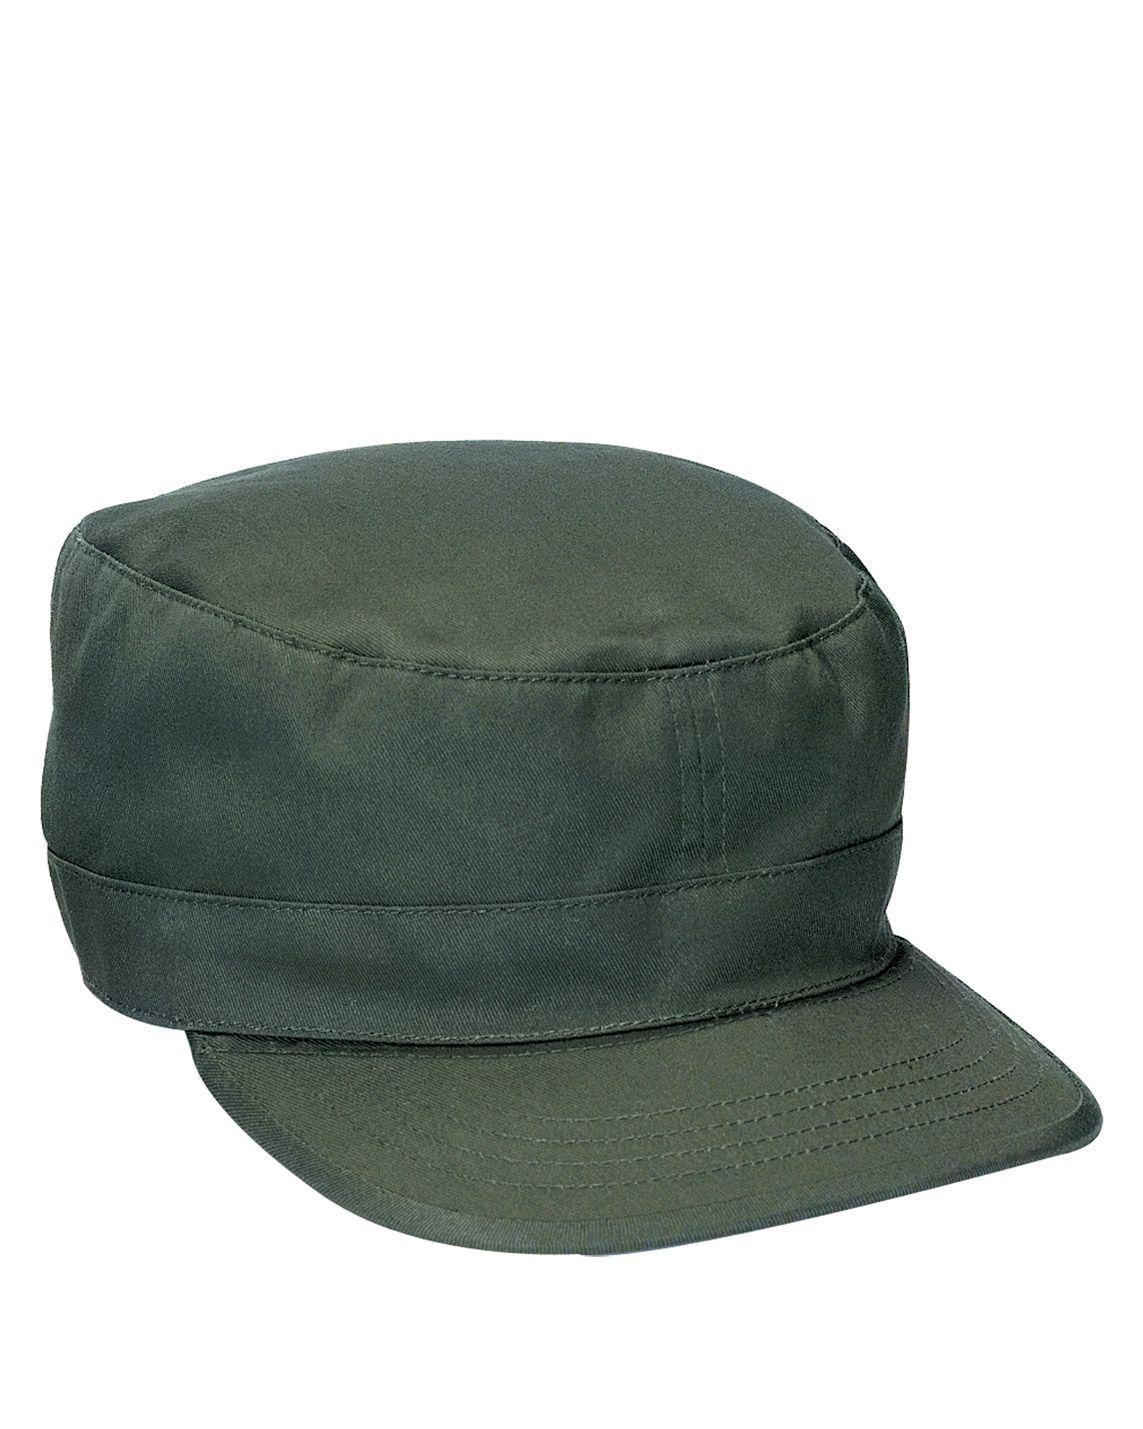 Rothco Military Fatigue Cap - Justerbar (Oliven, One Size)